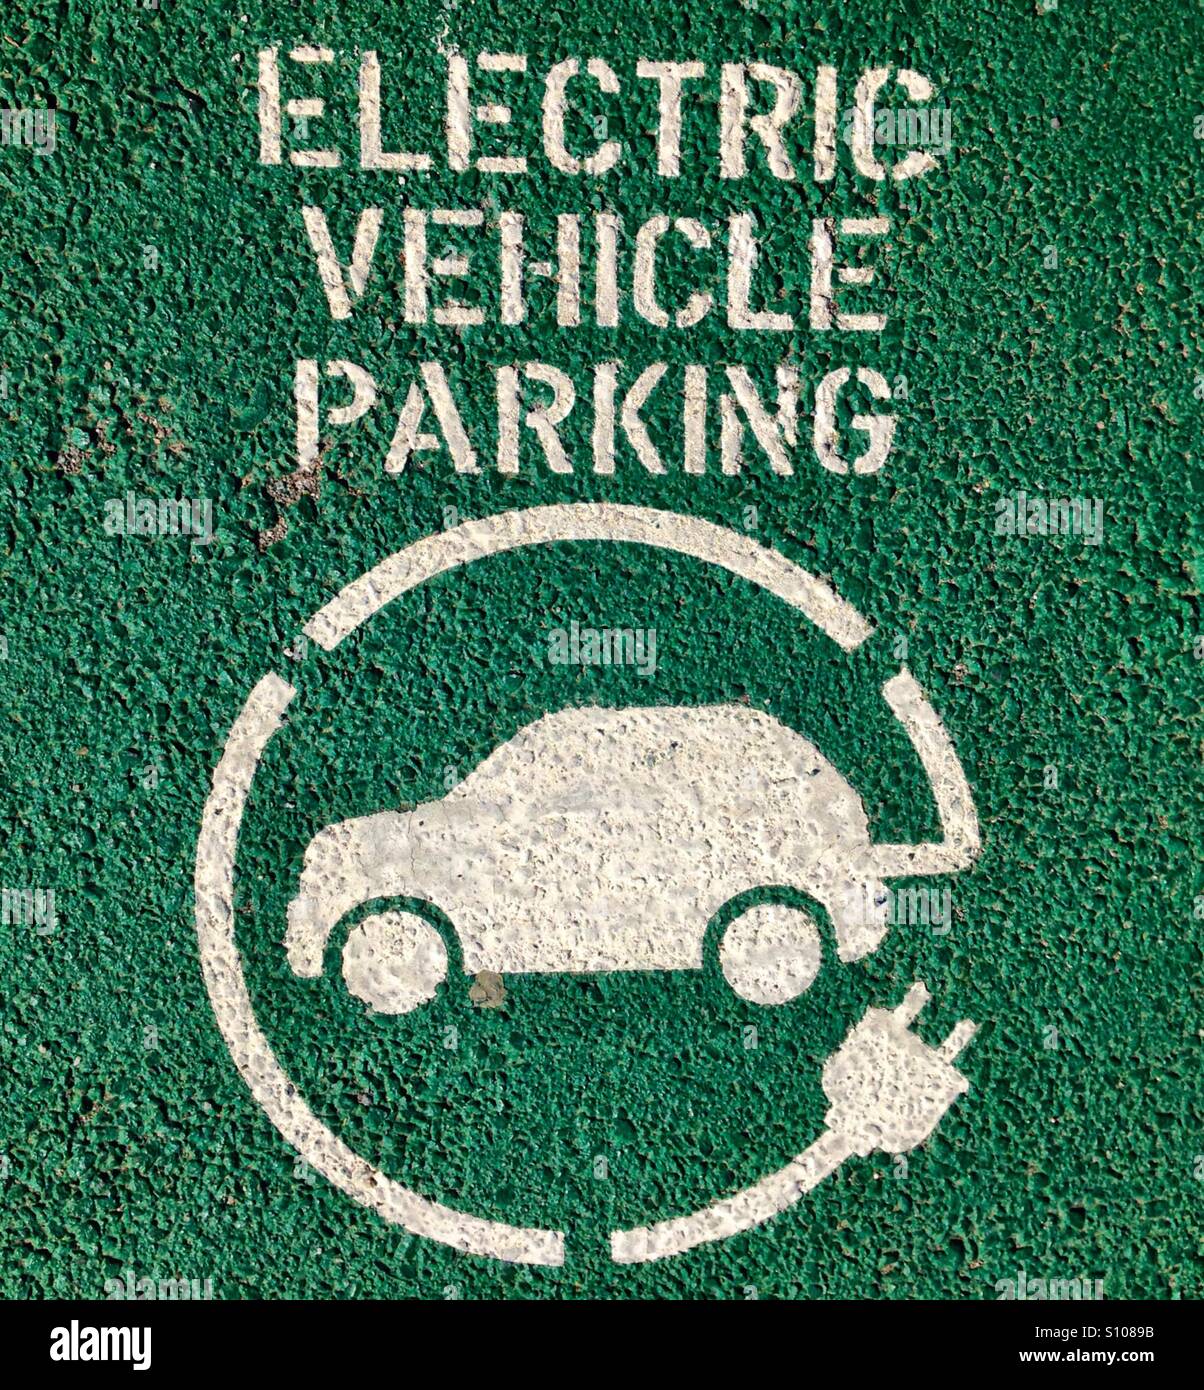 Street signage for electric vehicles Stock Photo